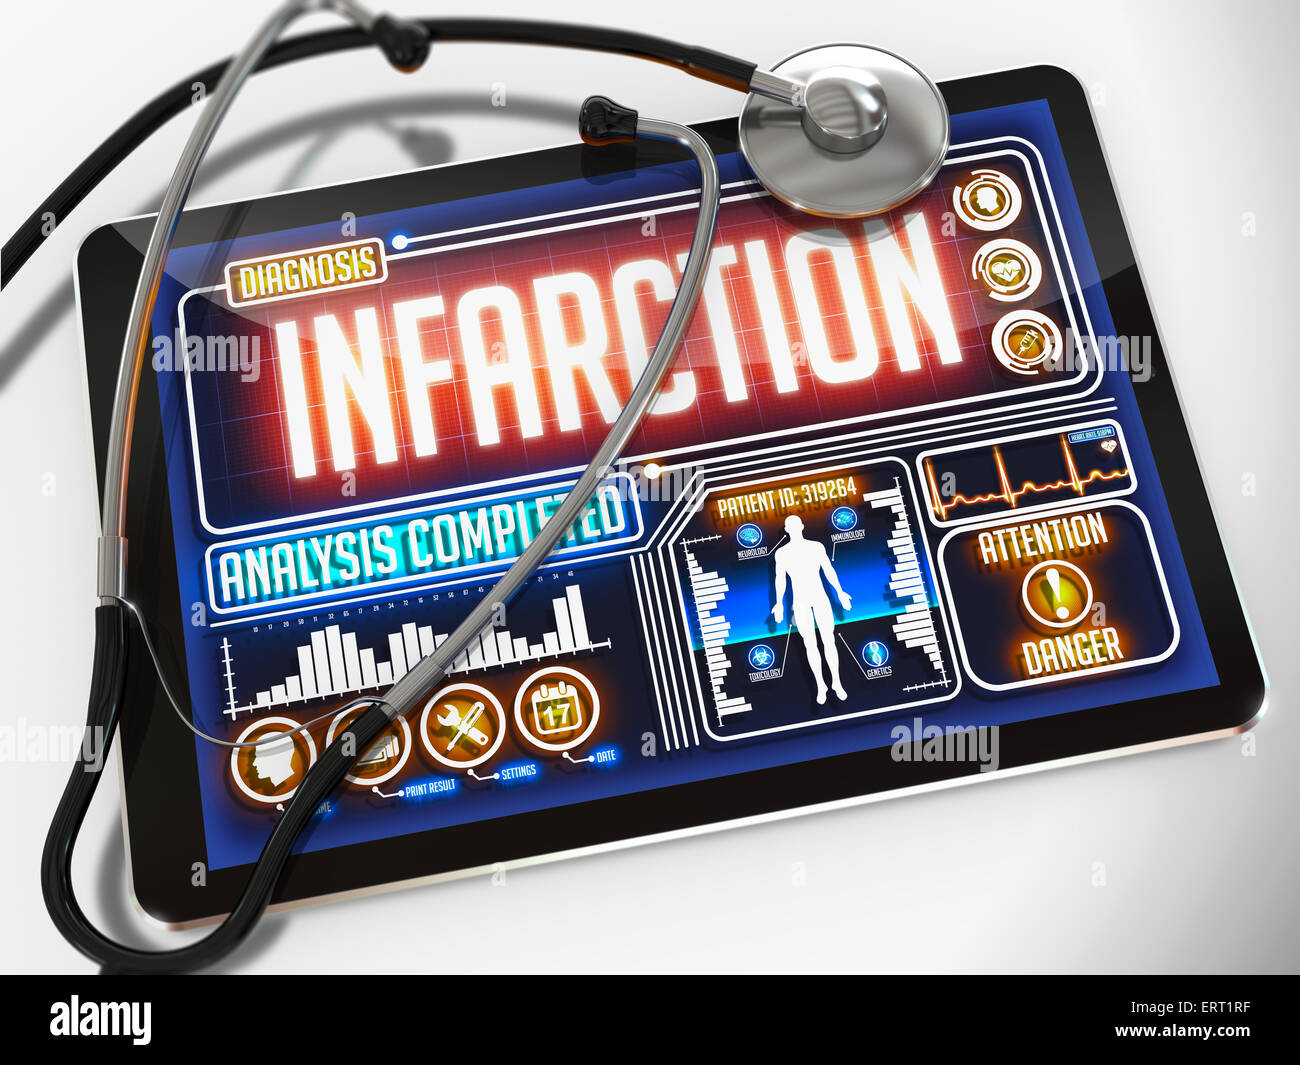 Infarction on the Display of Medical Tablet. Stock Photo